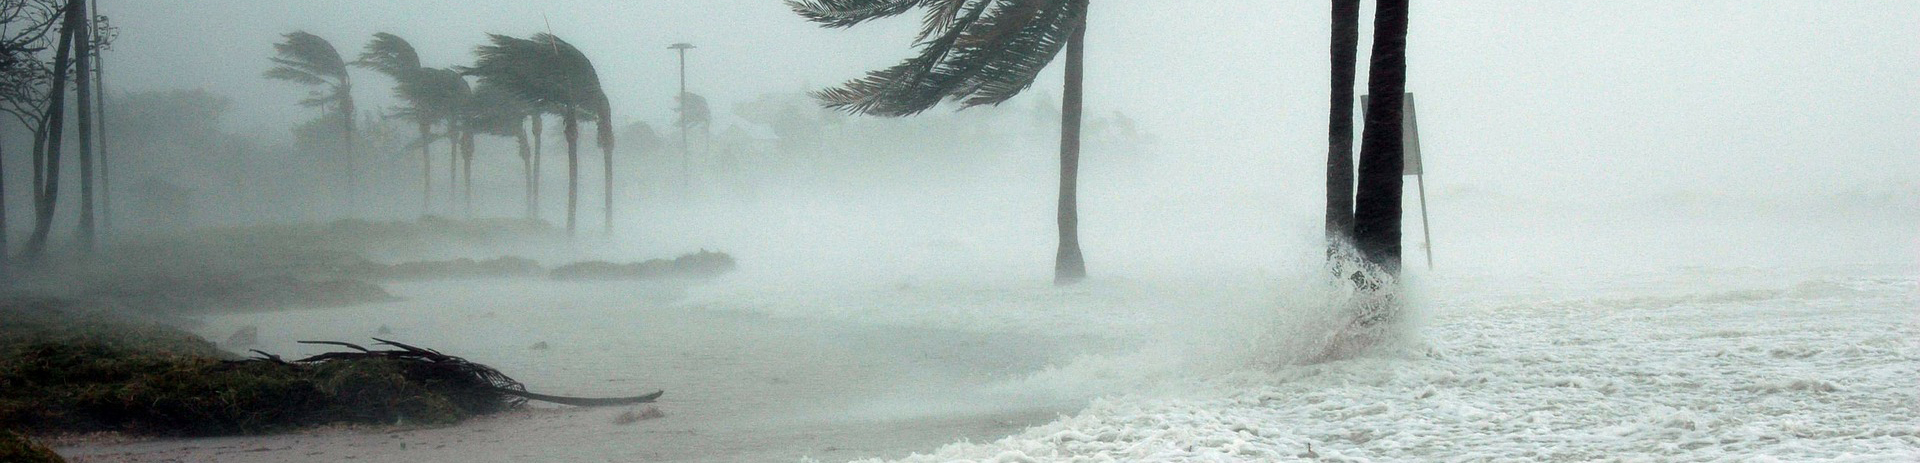 Palm trees blowing in severe hurricane winds.